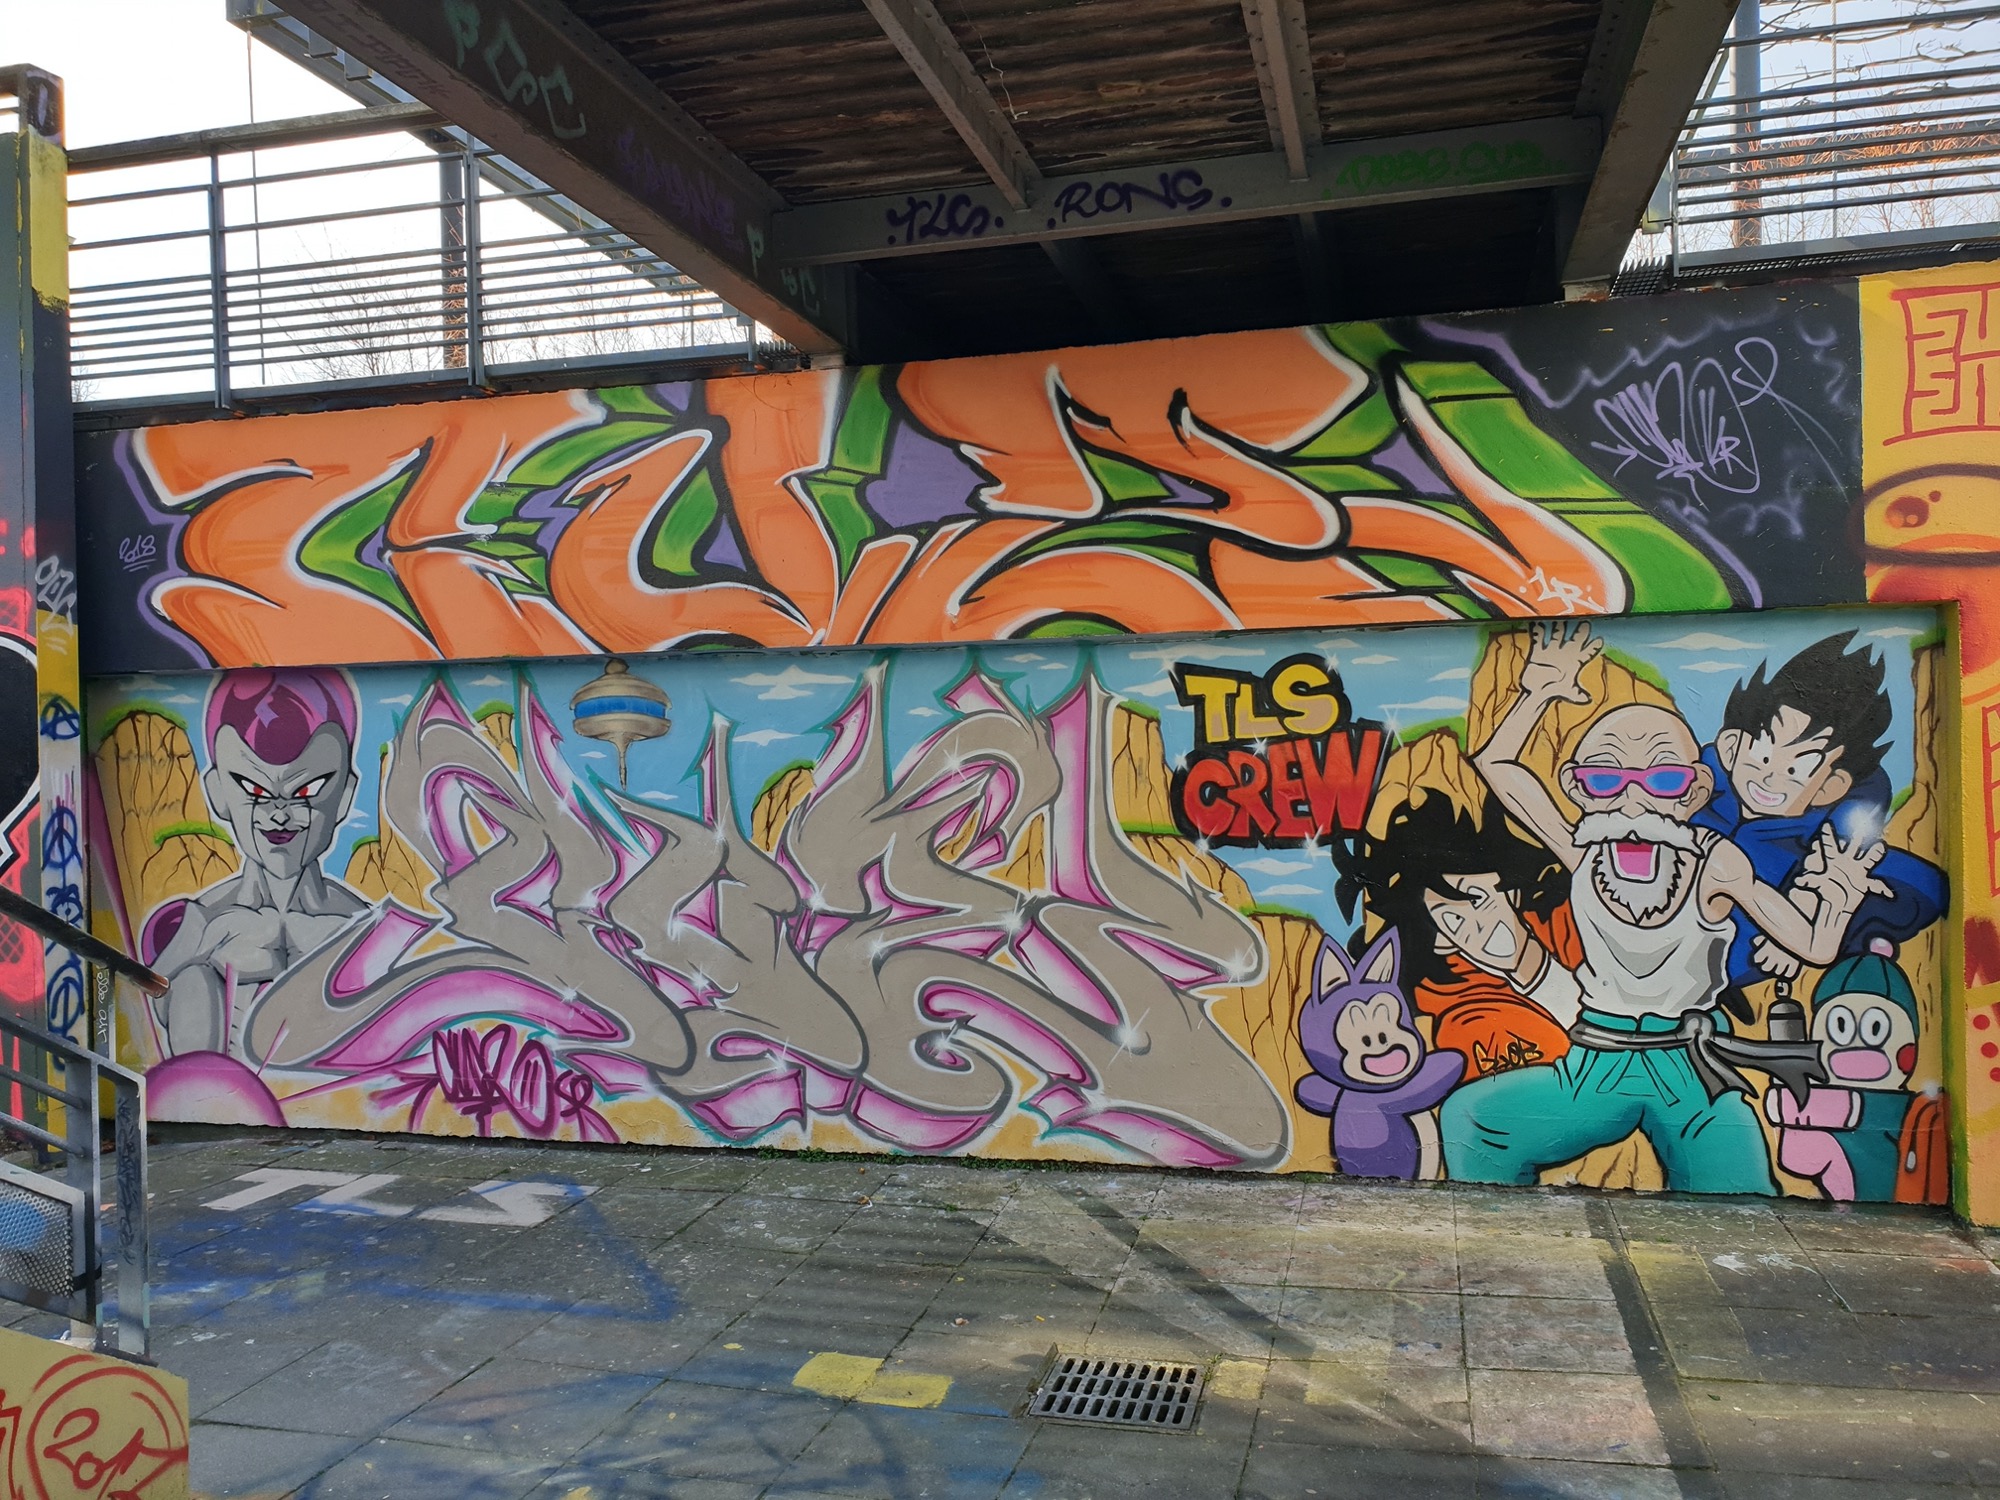 Graffiti 1156 Dragonball Z captured by Toutounepictures in Angers France